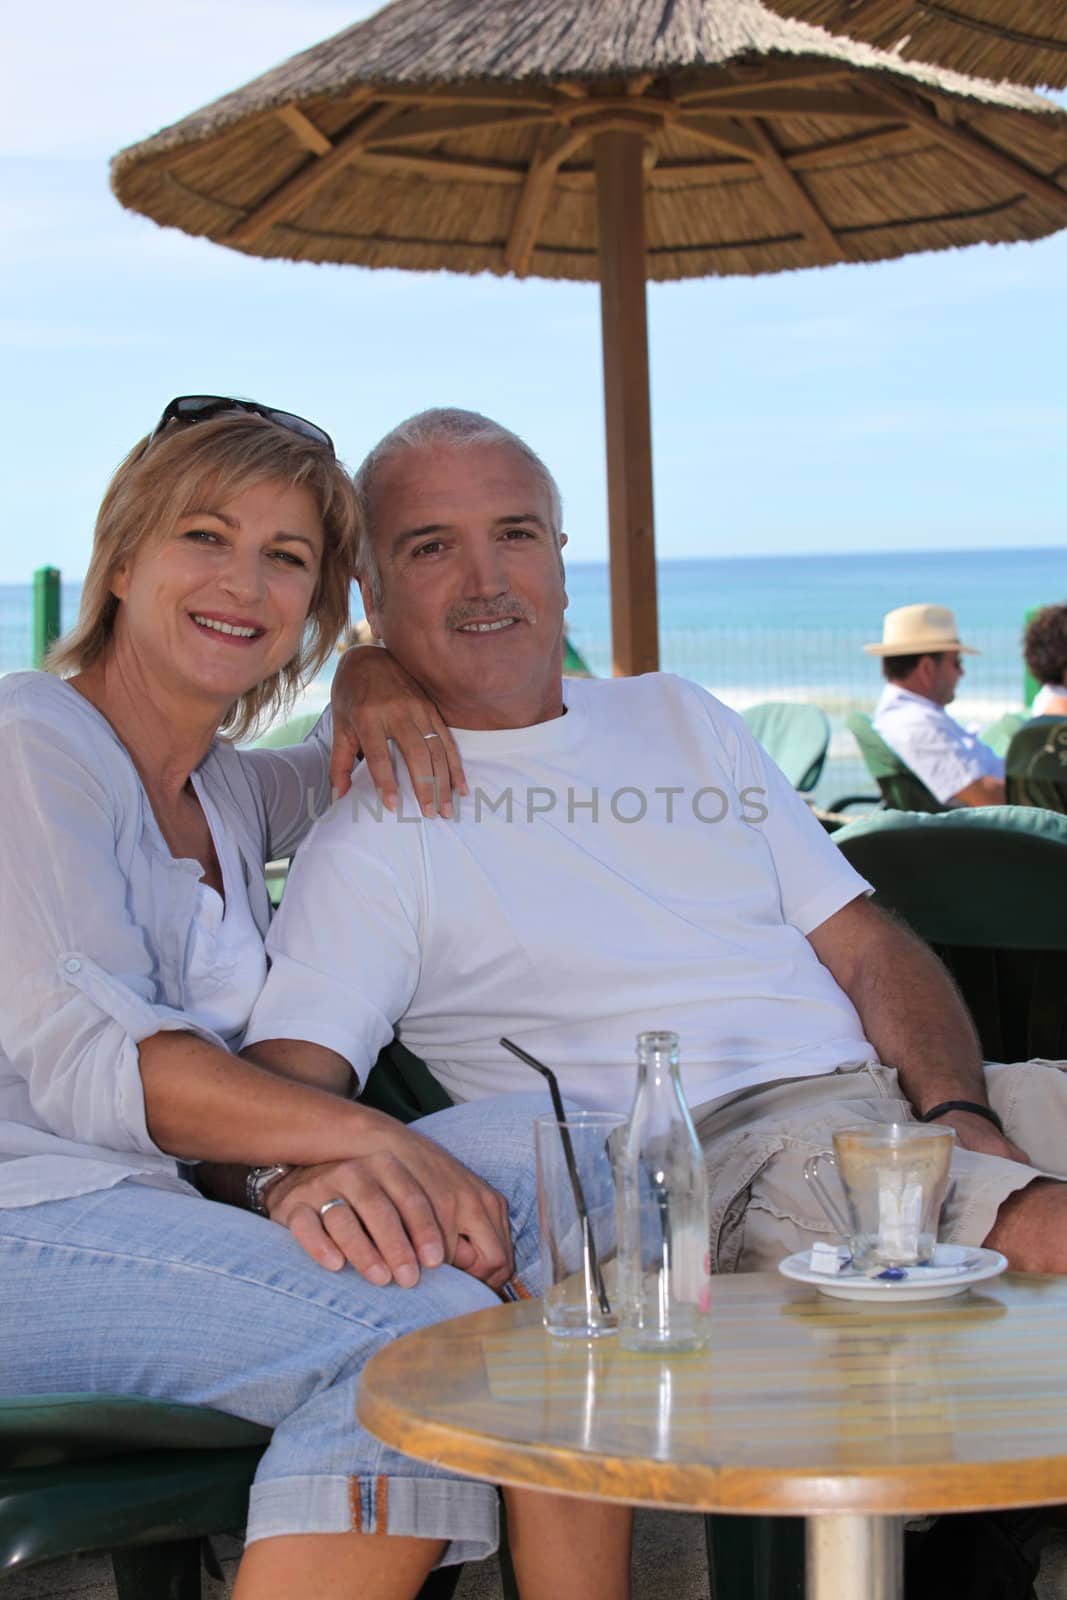 Couple sitting at a beachside cafe by phovoir